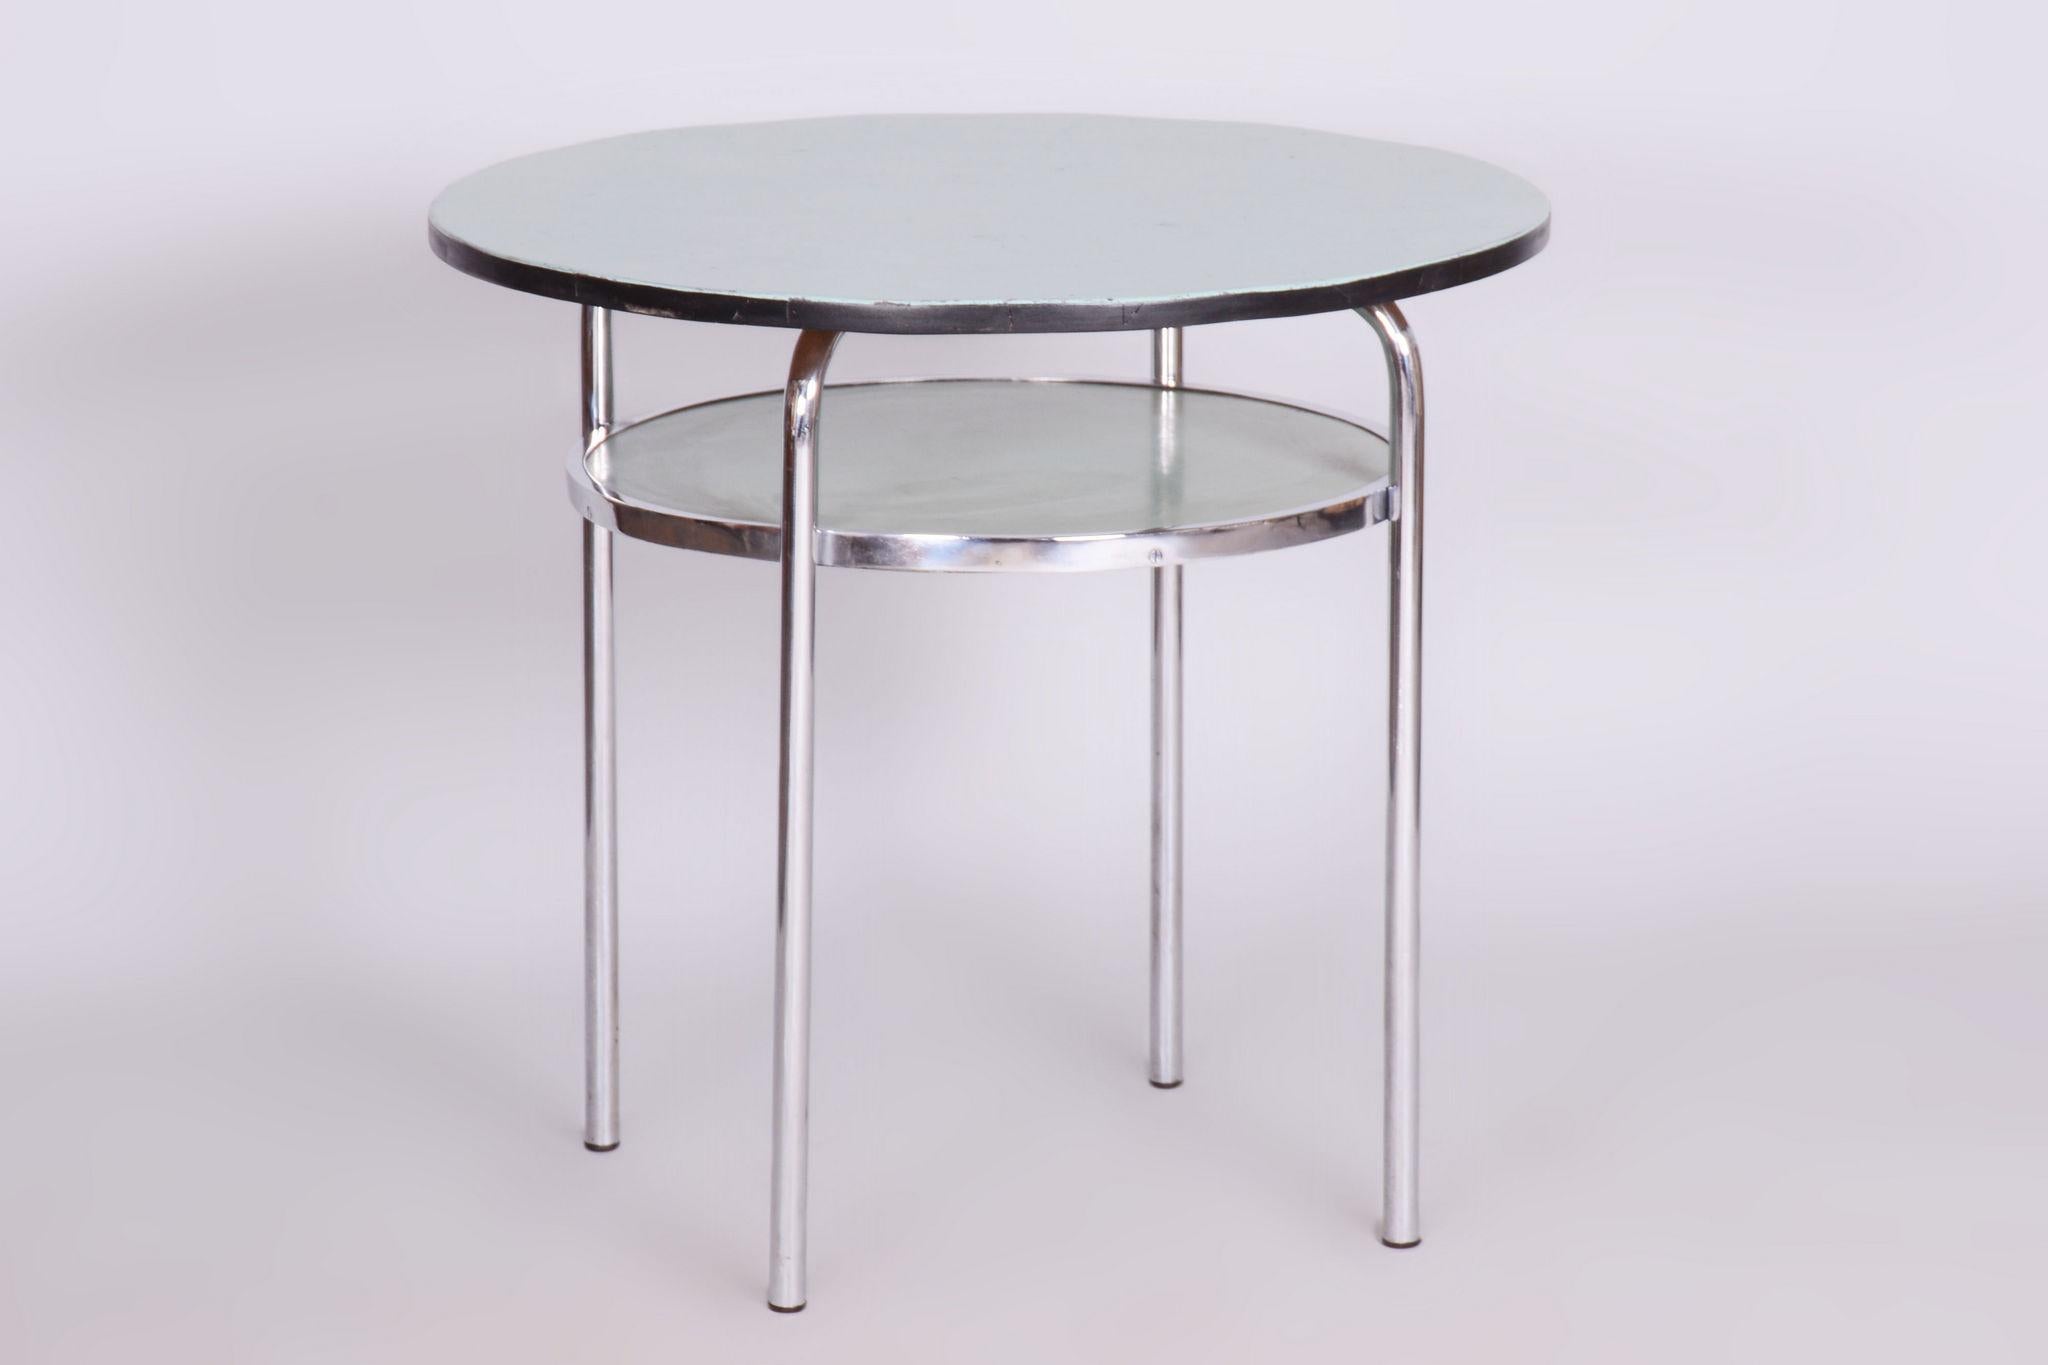 Restored Bauhaus Small Round Table, Chrome, Revived Polish, Czechia, 1930s For Sale 4